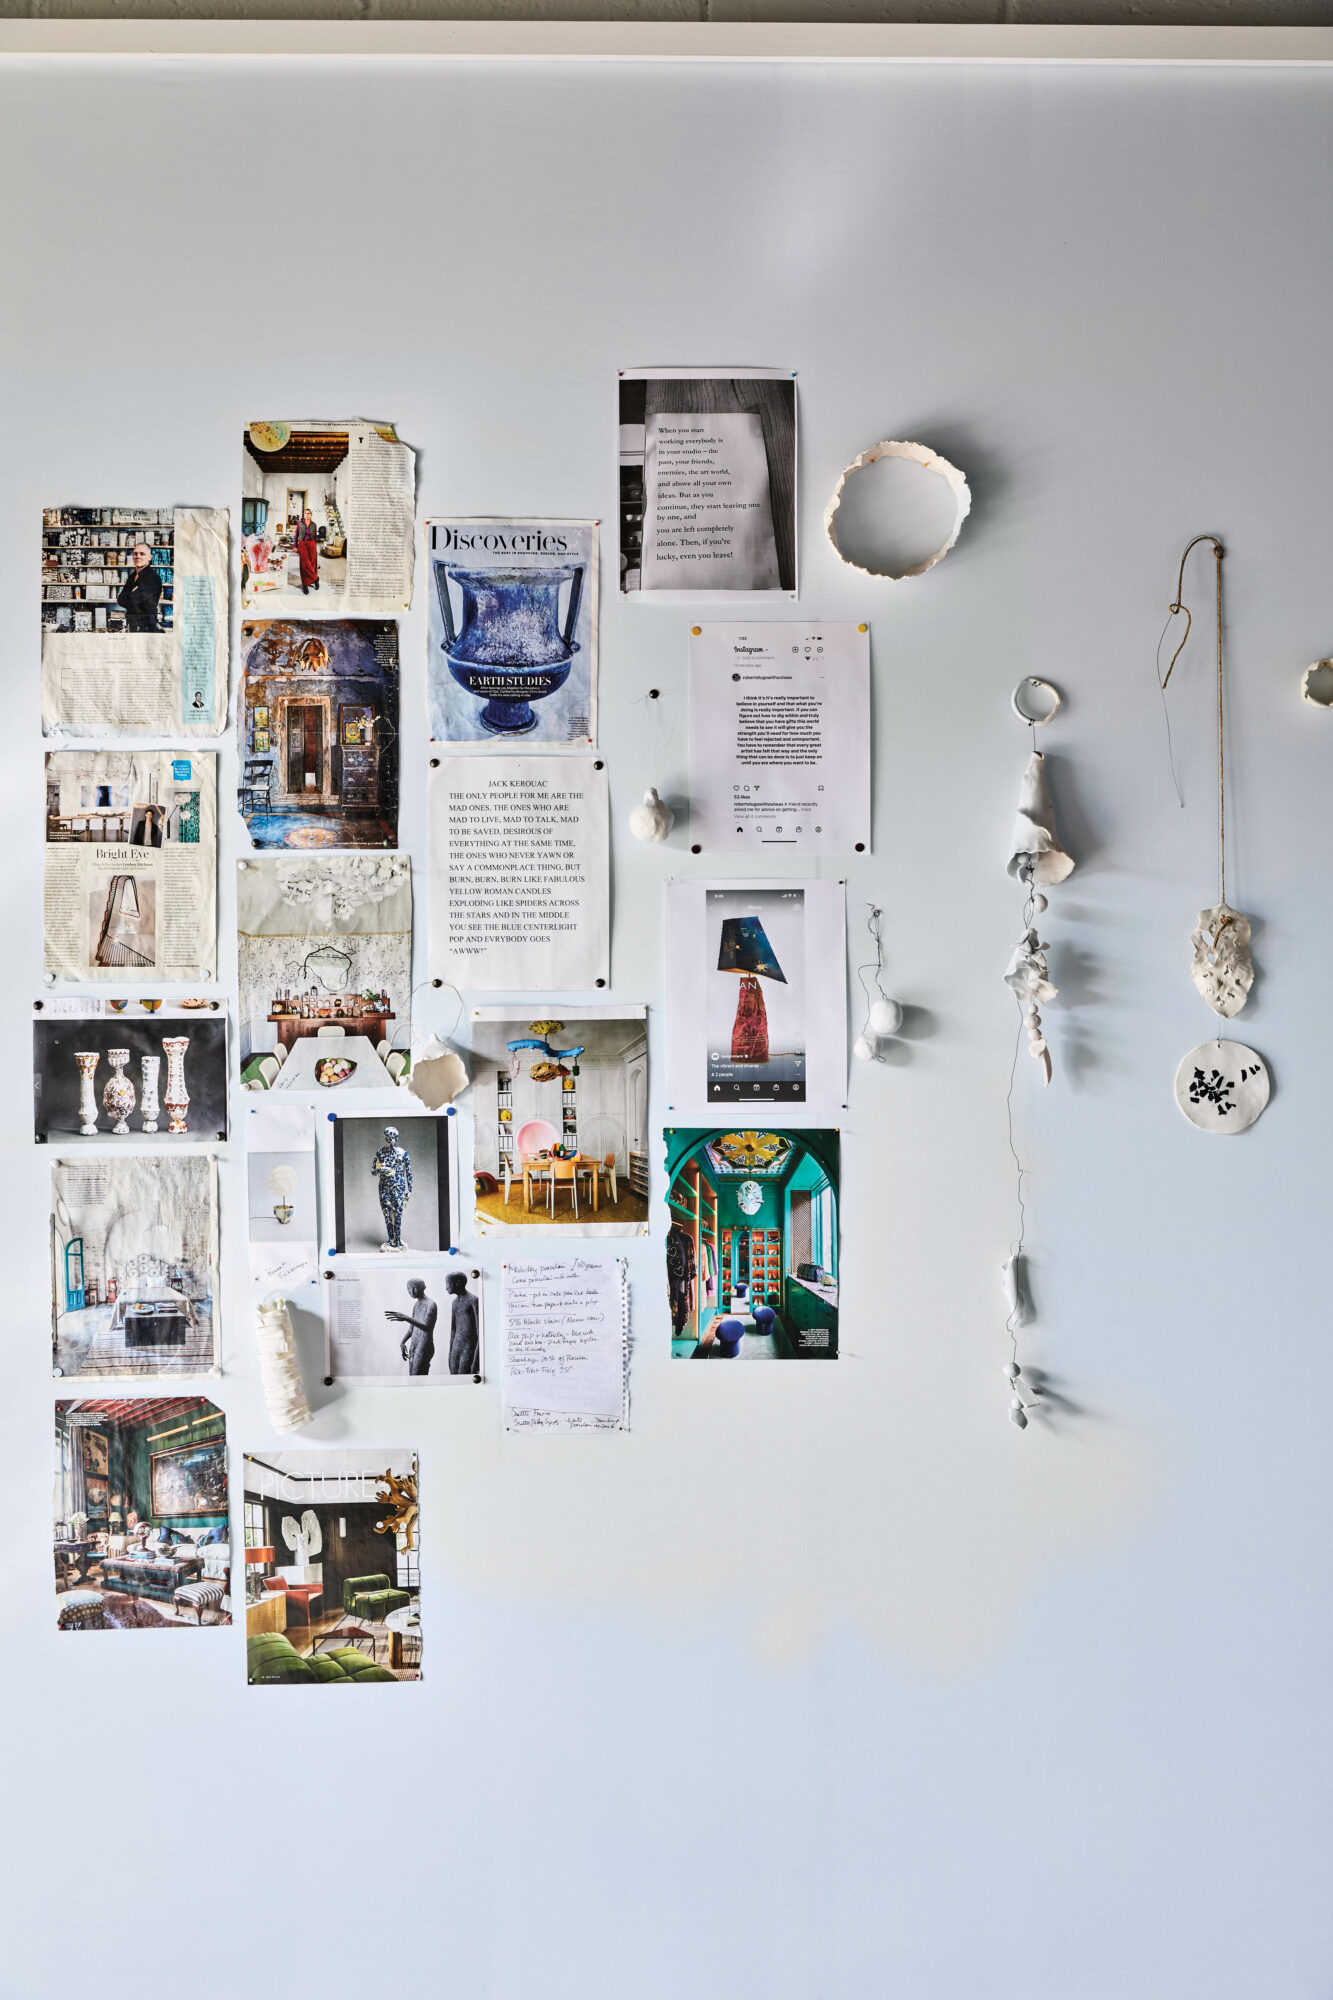 Dana Castle's studio wall tacked with inspirational pictures, words and objects